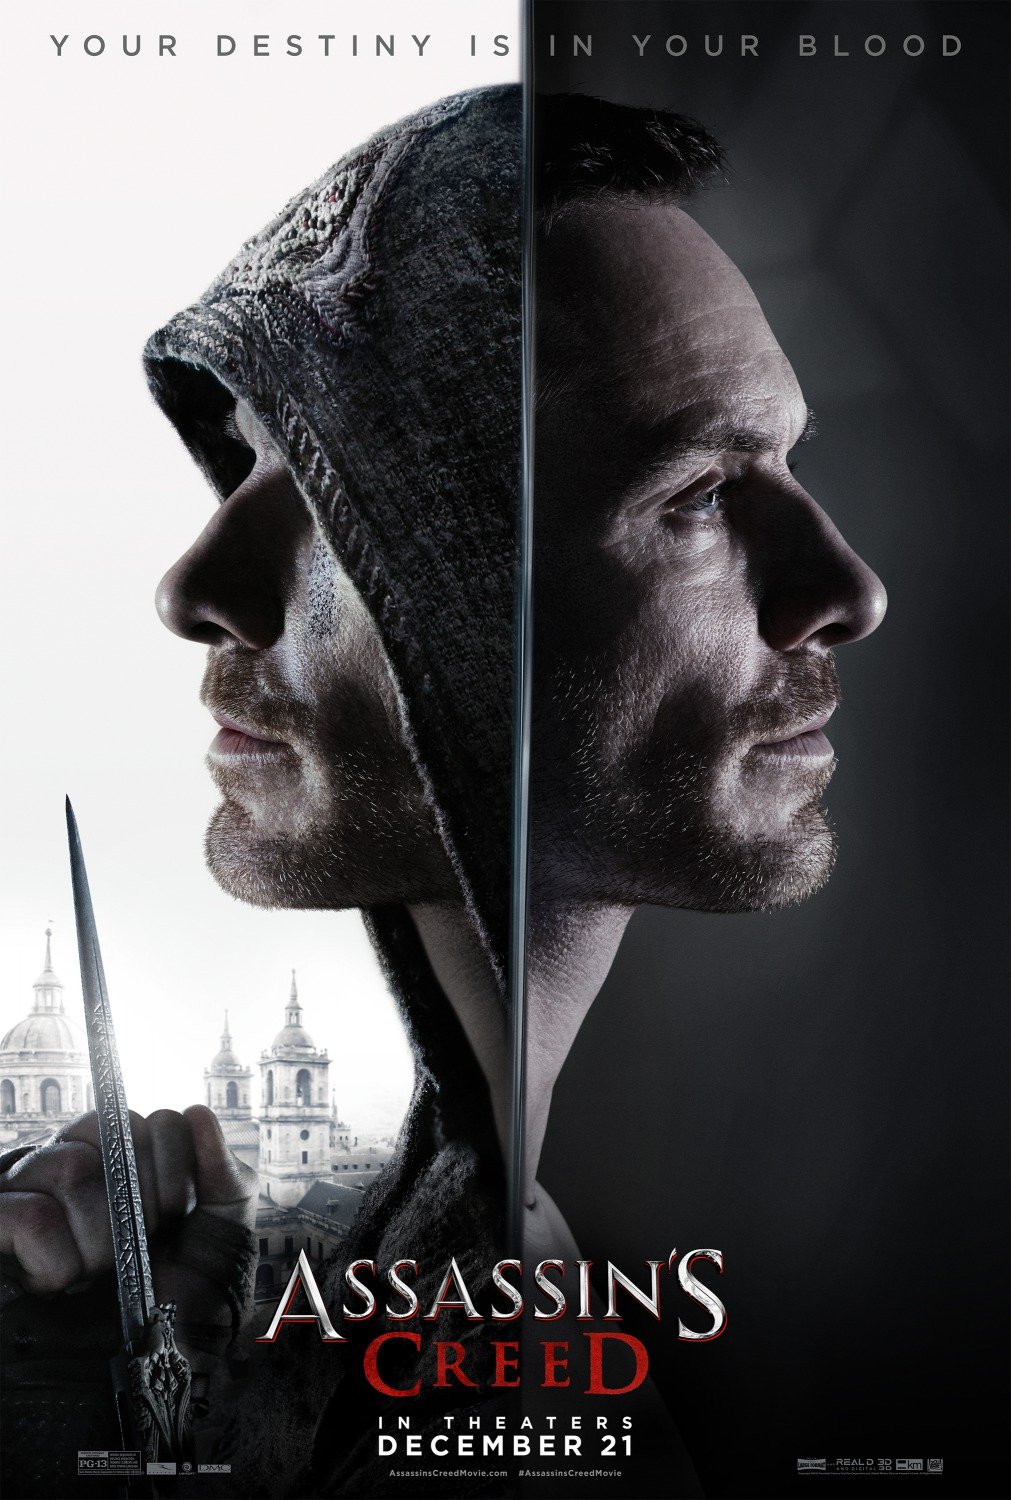 Assassin's creed [2016]